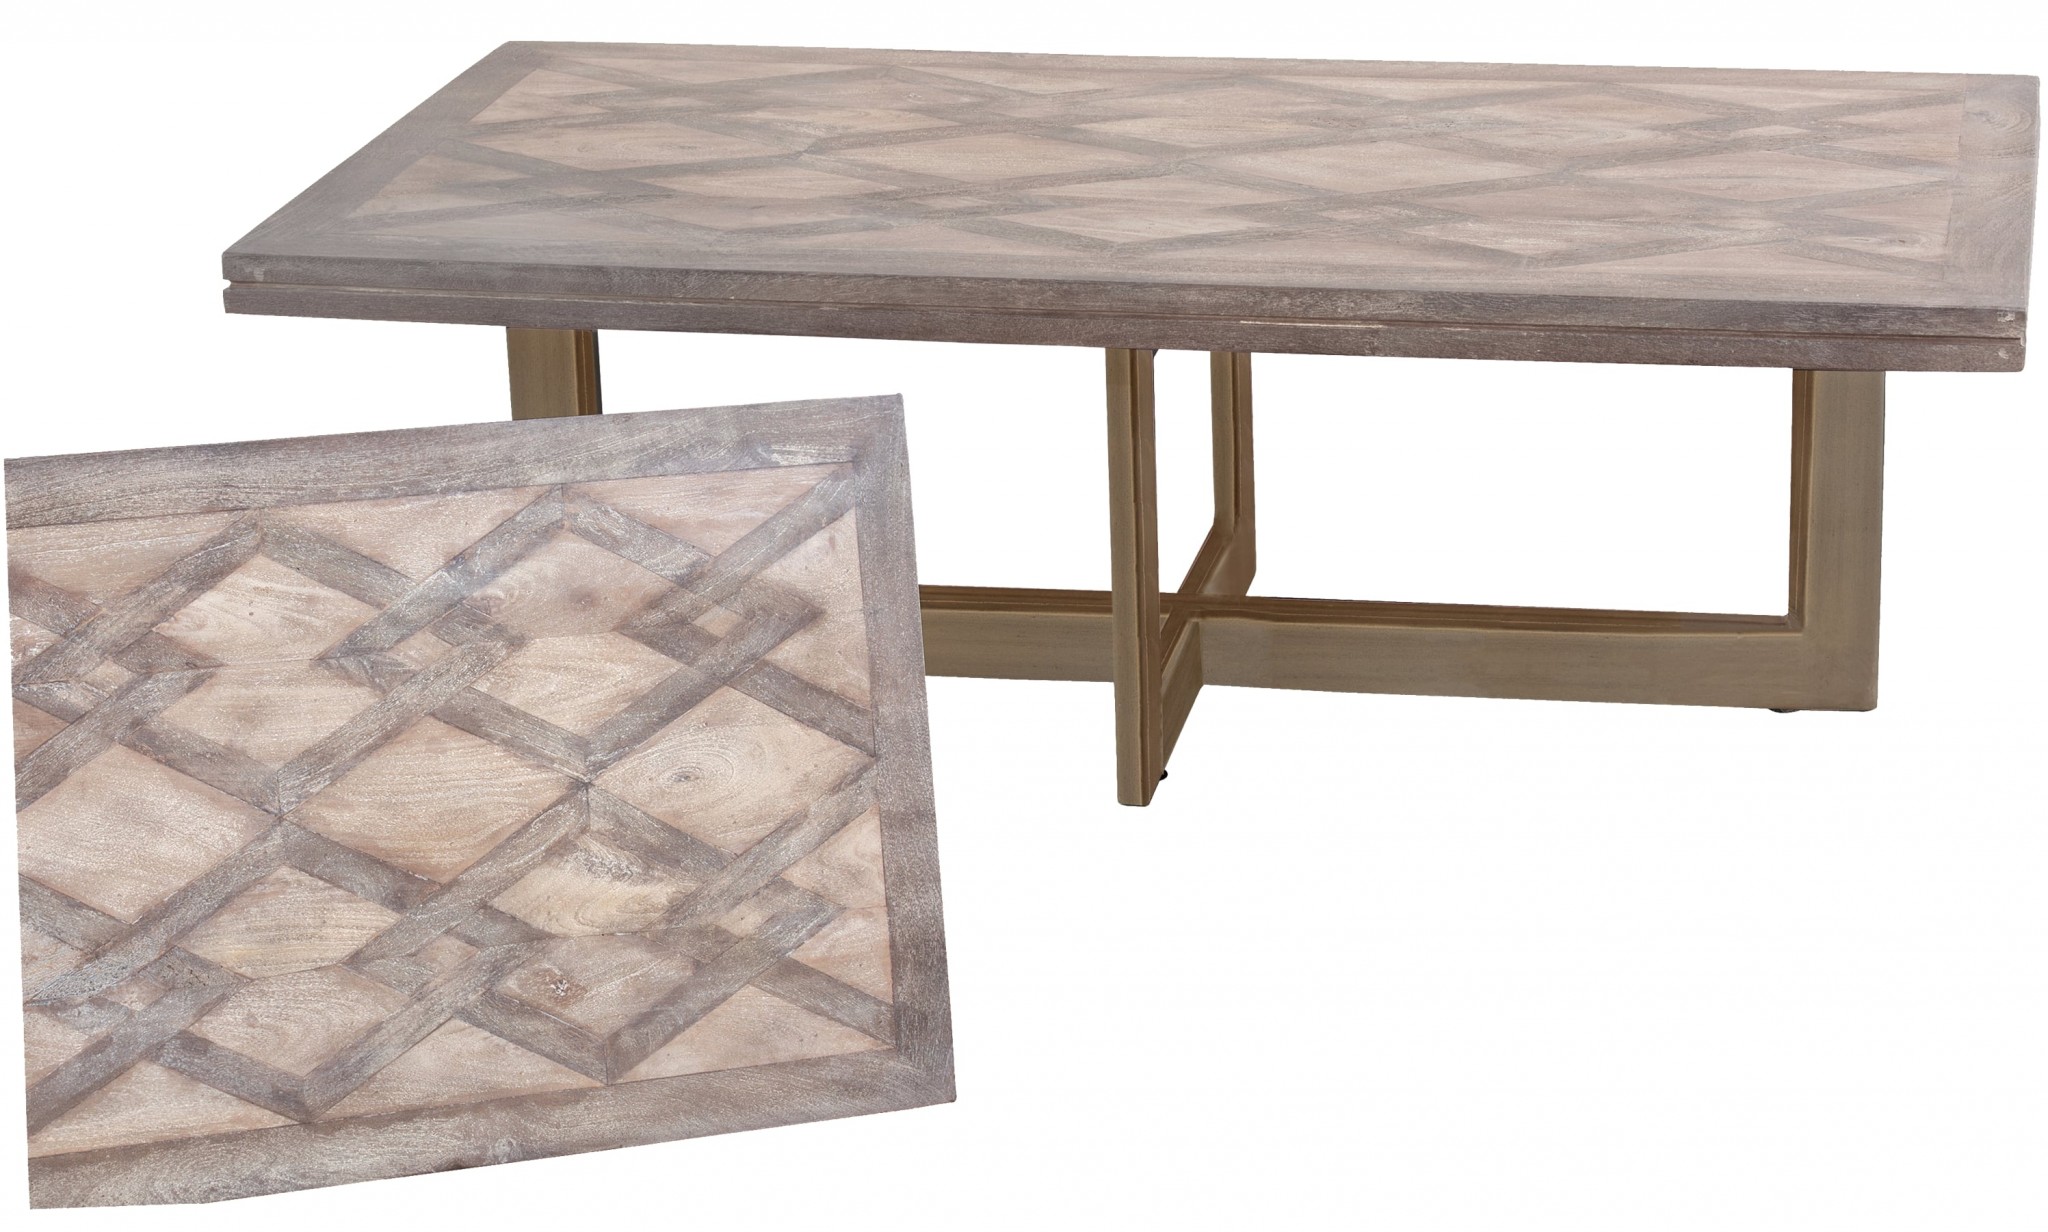 58" x 28" x 18" Wood Cream and Gold Contemporary Coffee Table